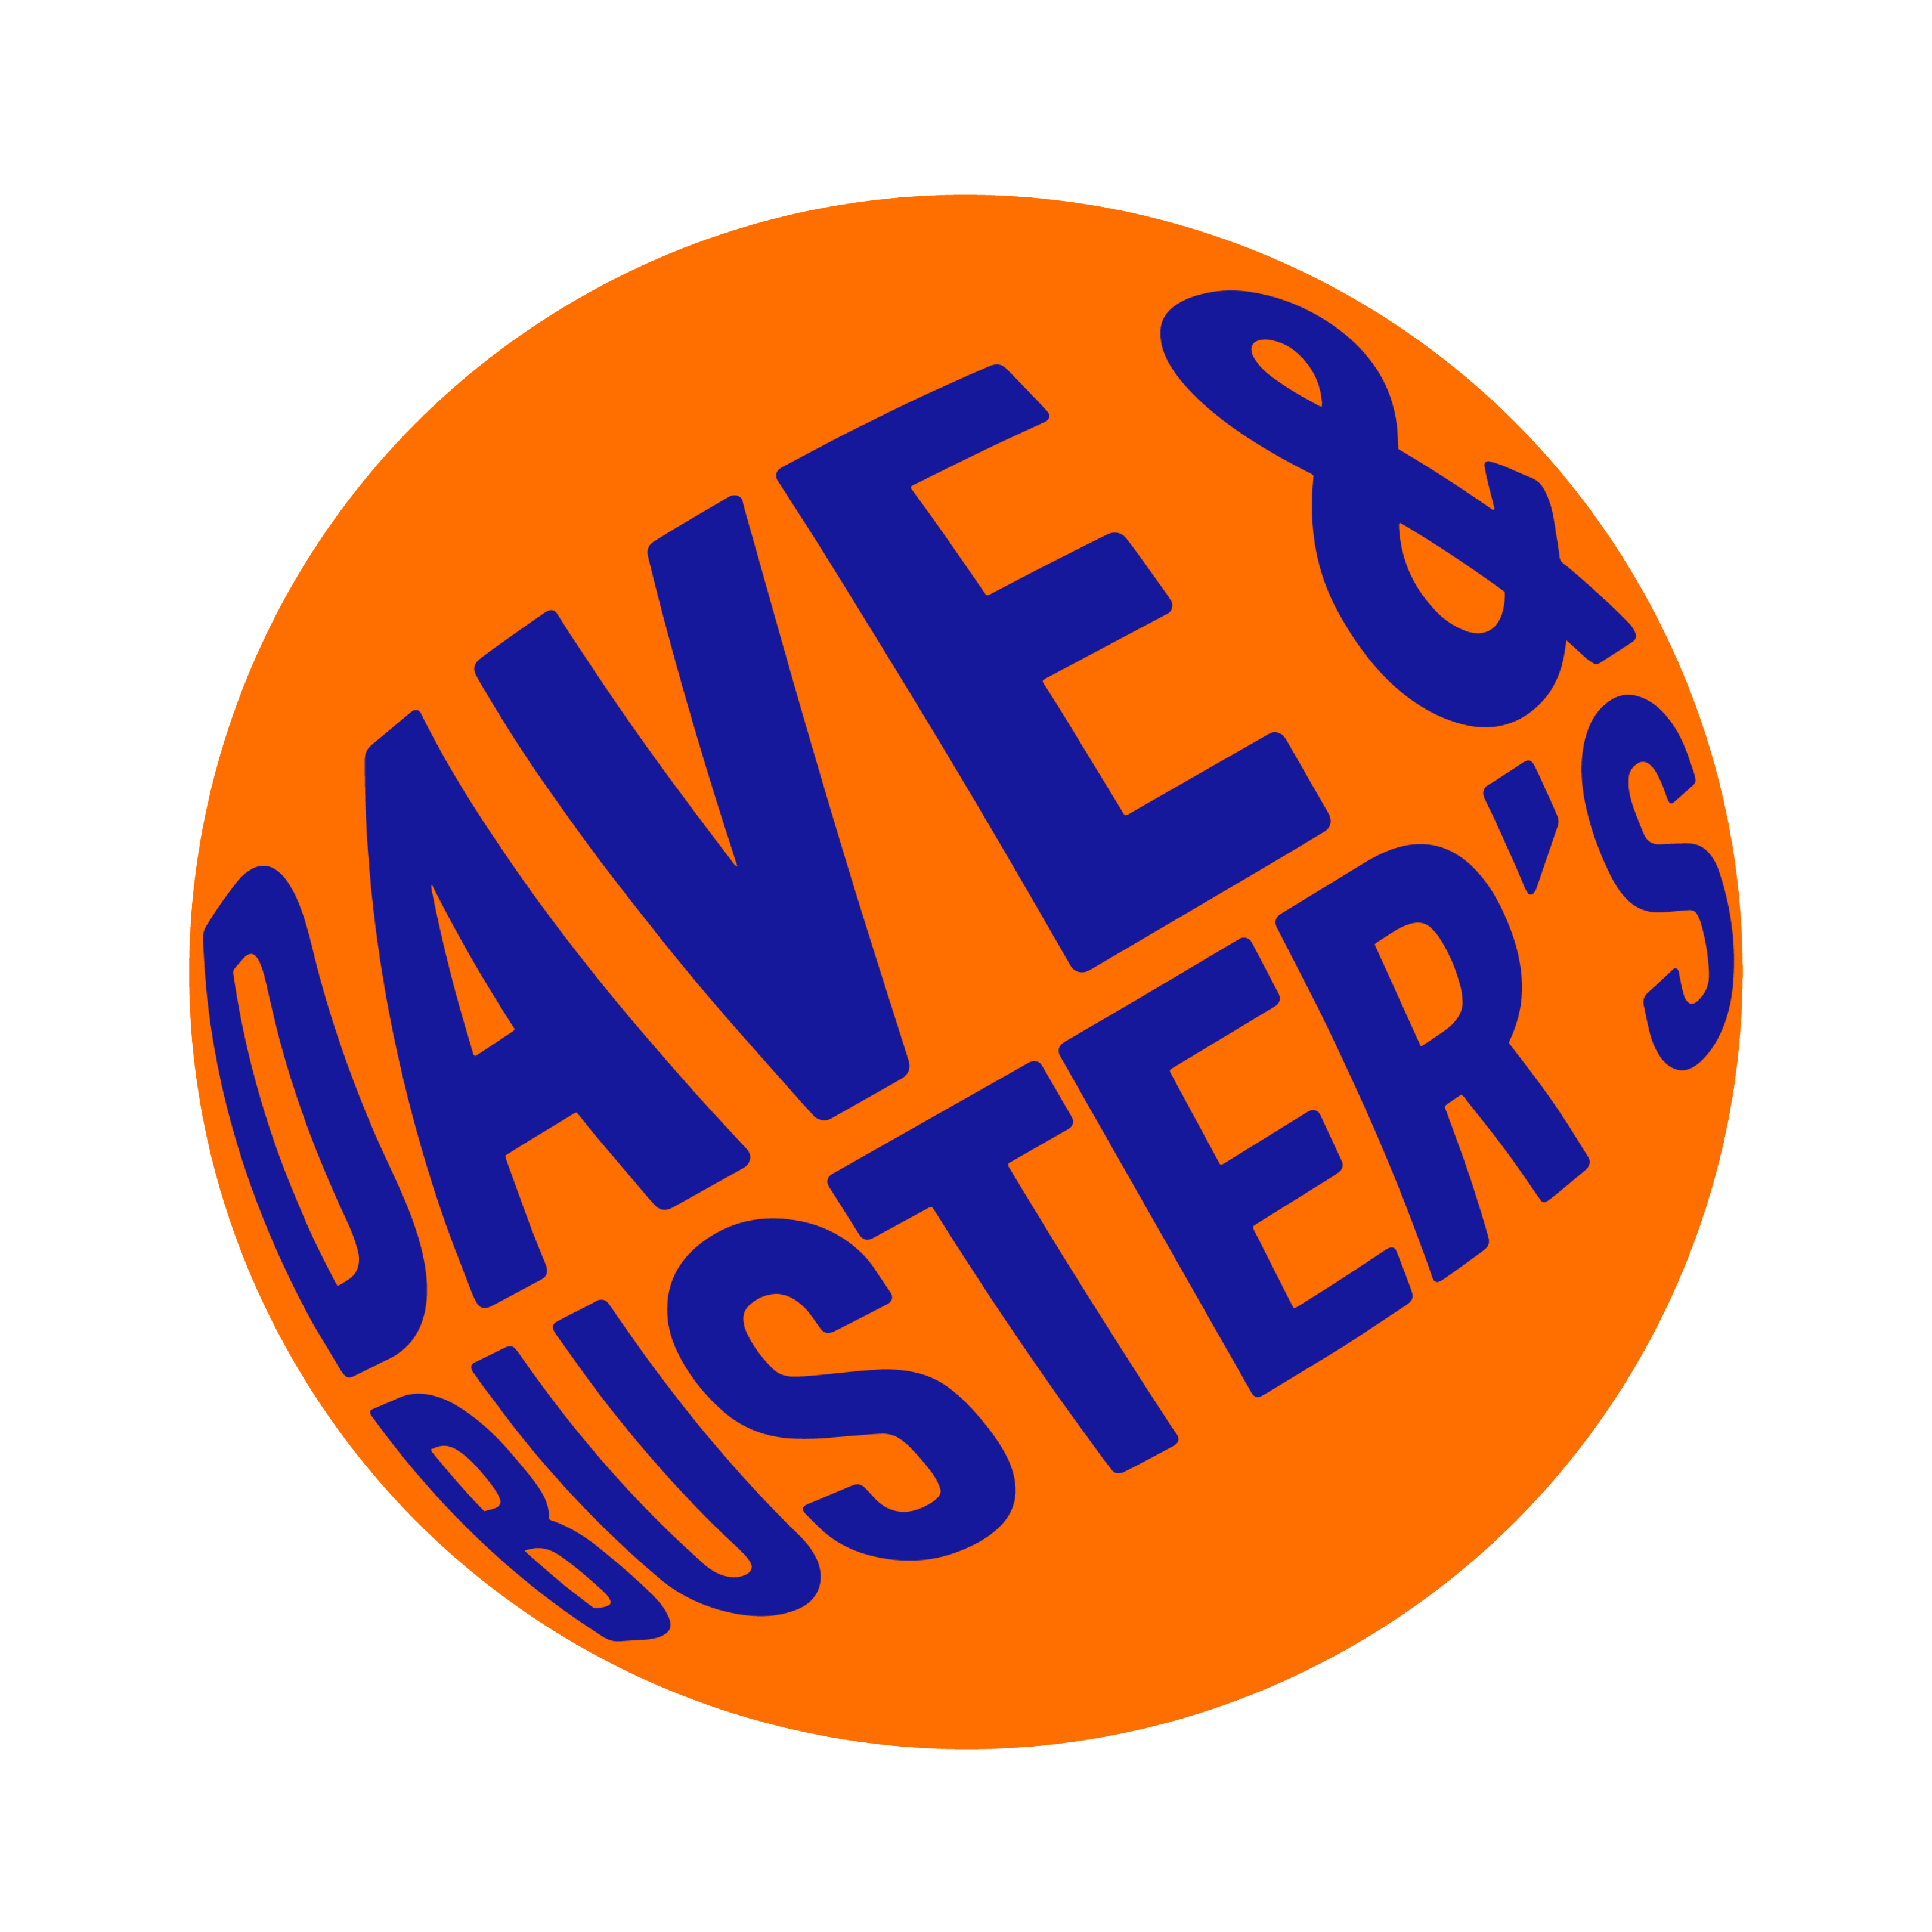 Dave & busters